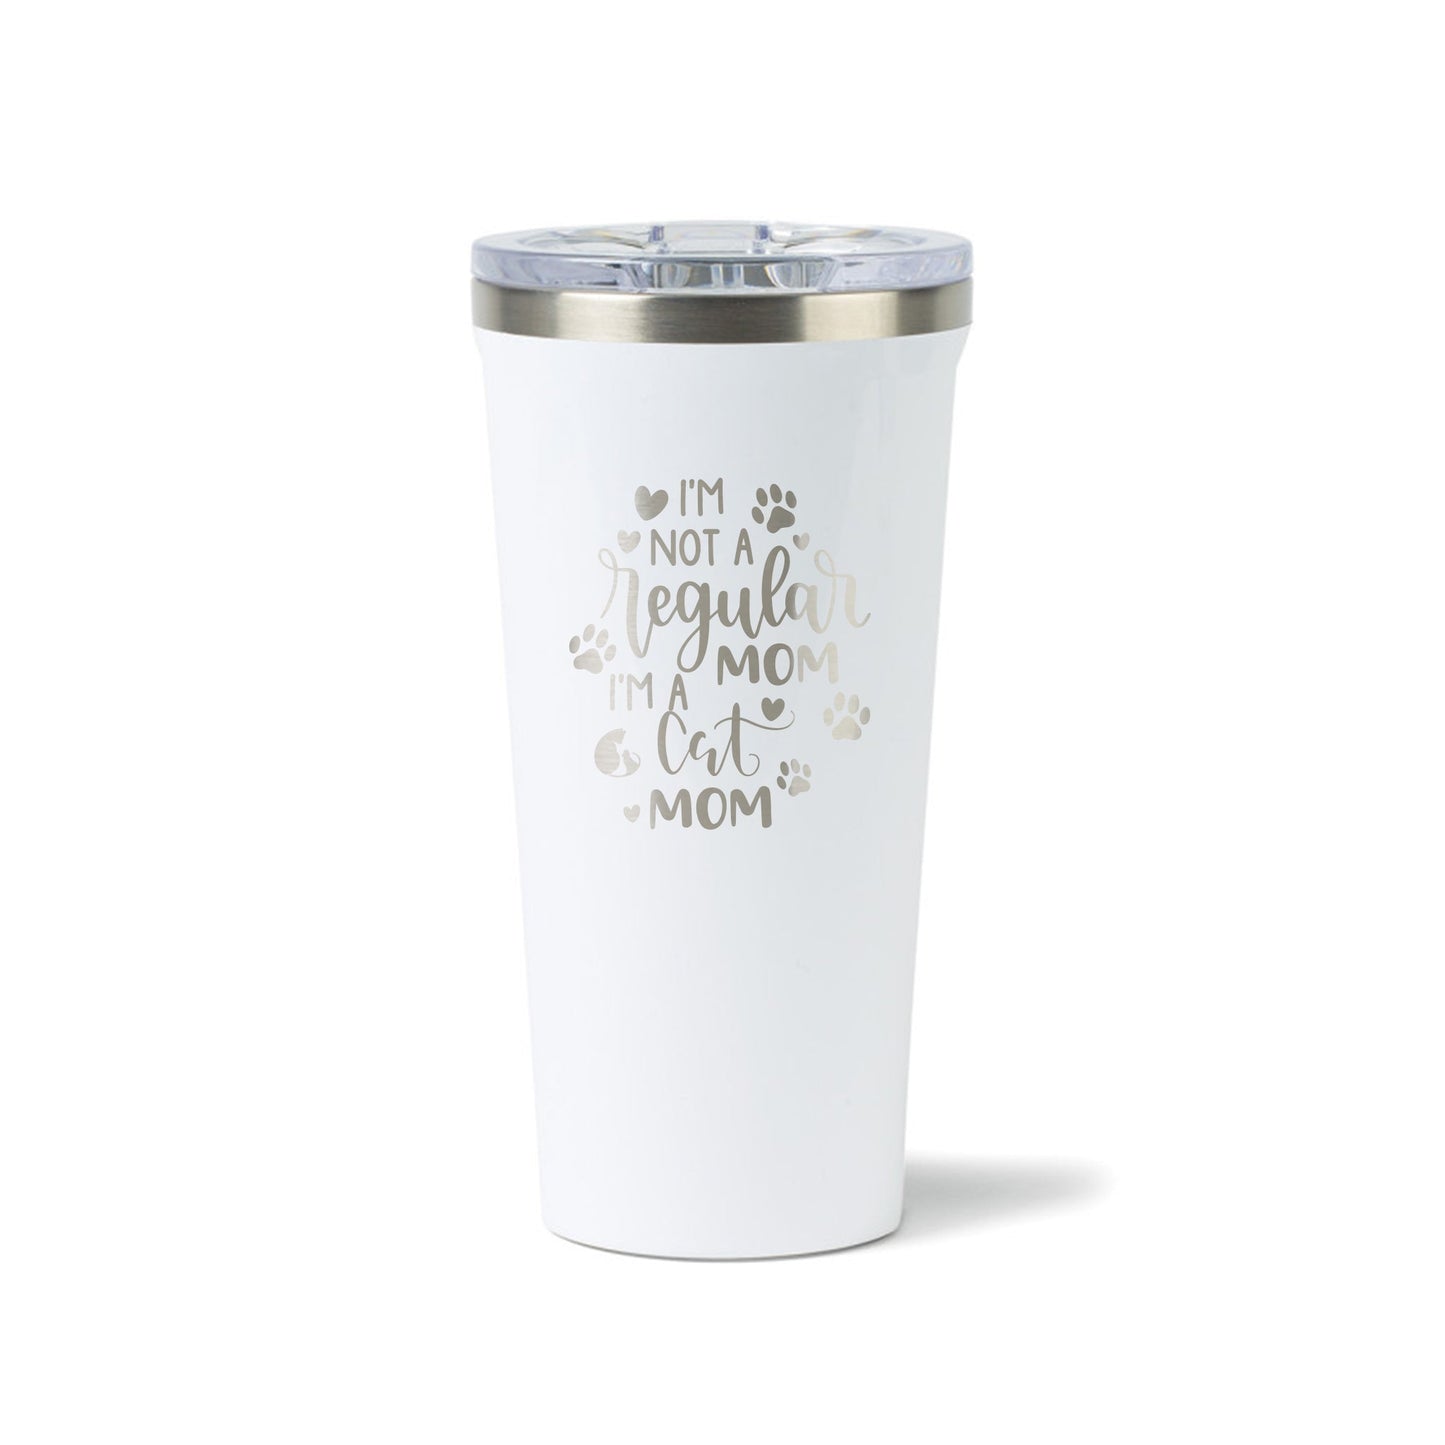 Personalized CORKCICLE® Tumbler 16 oz - Etchified-CORKCICLE®-ETC-GMLN-100481-100481-100